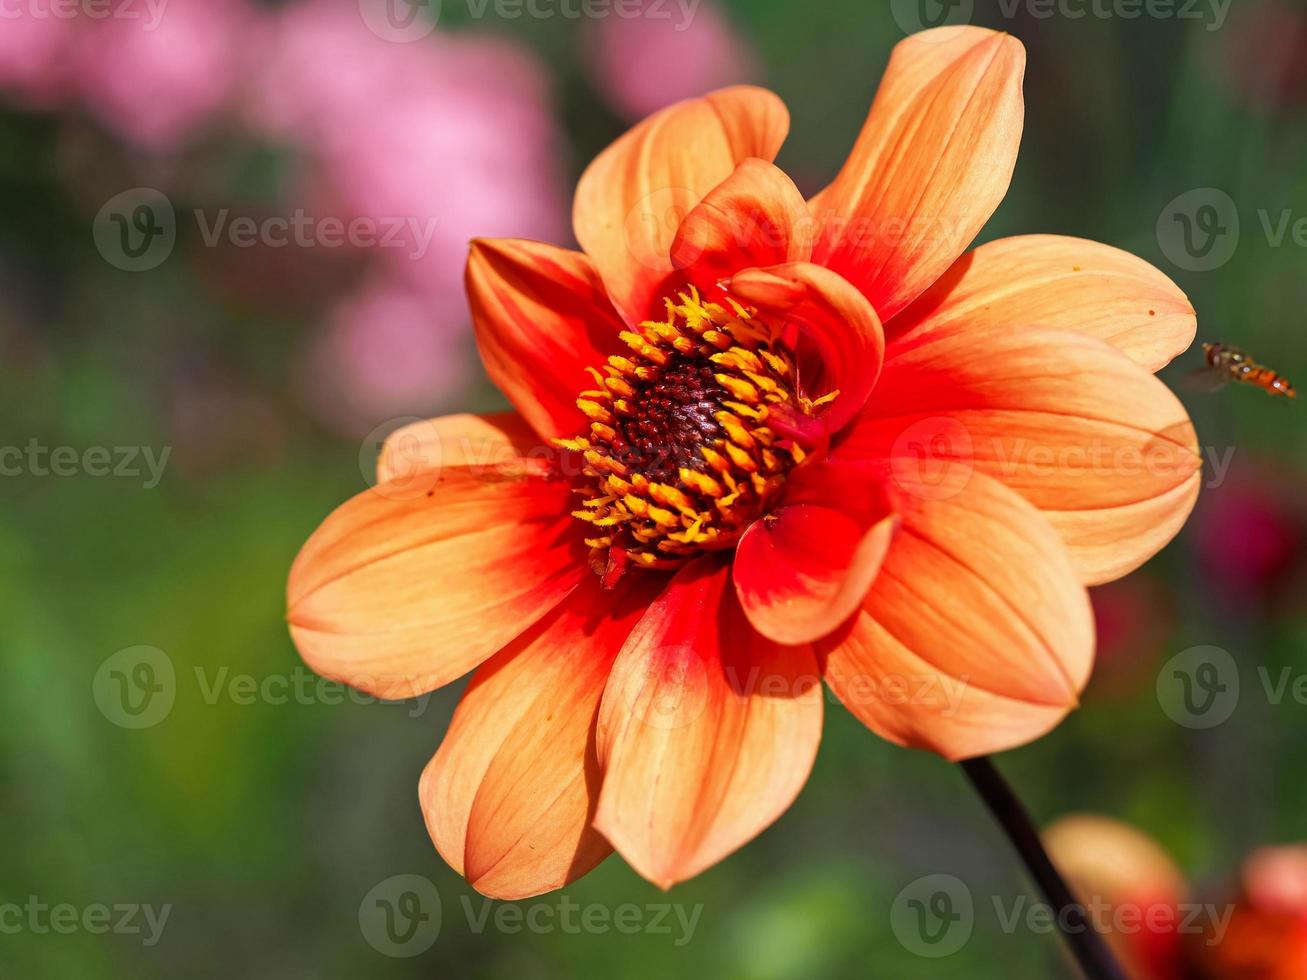 Beautiful orange Dahlia flower with an approaching hoverfly photo